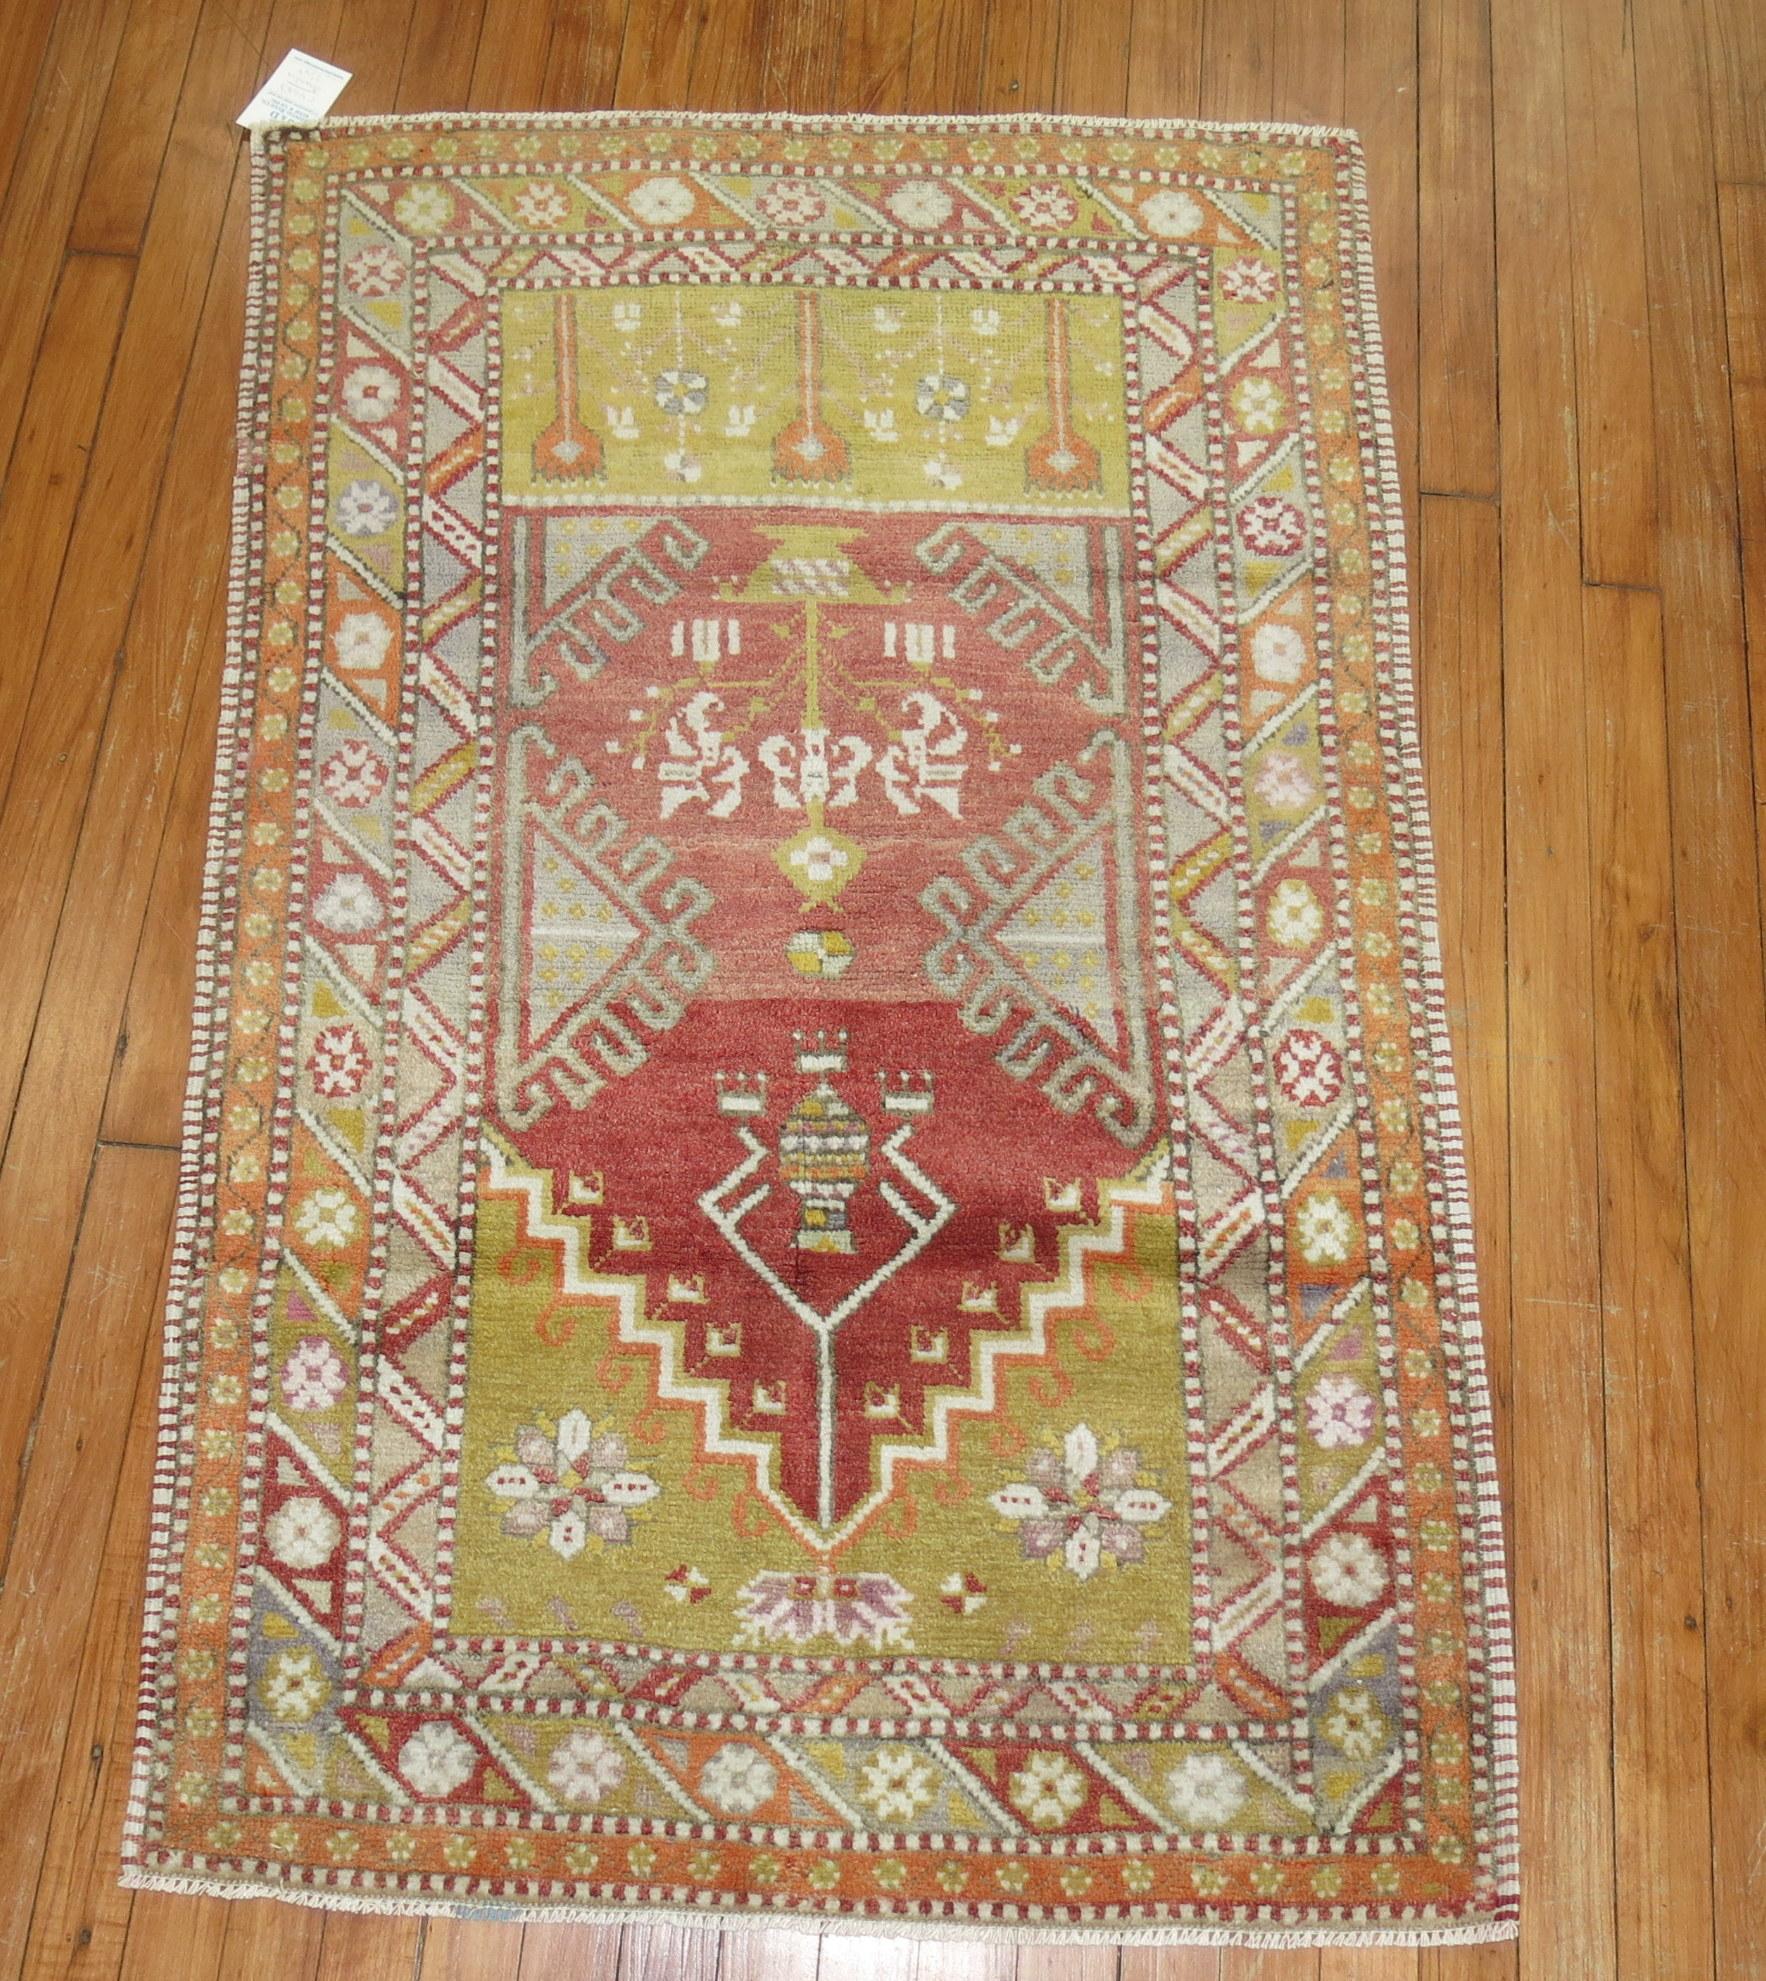 Vintage rug from Oushak with a geometric design with soft red and green dominant accents.

Measures: 2'9